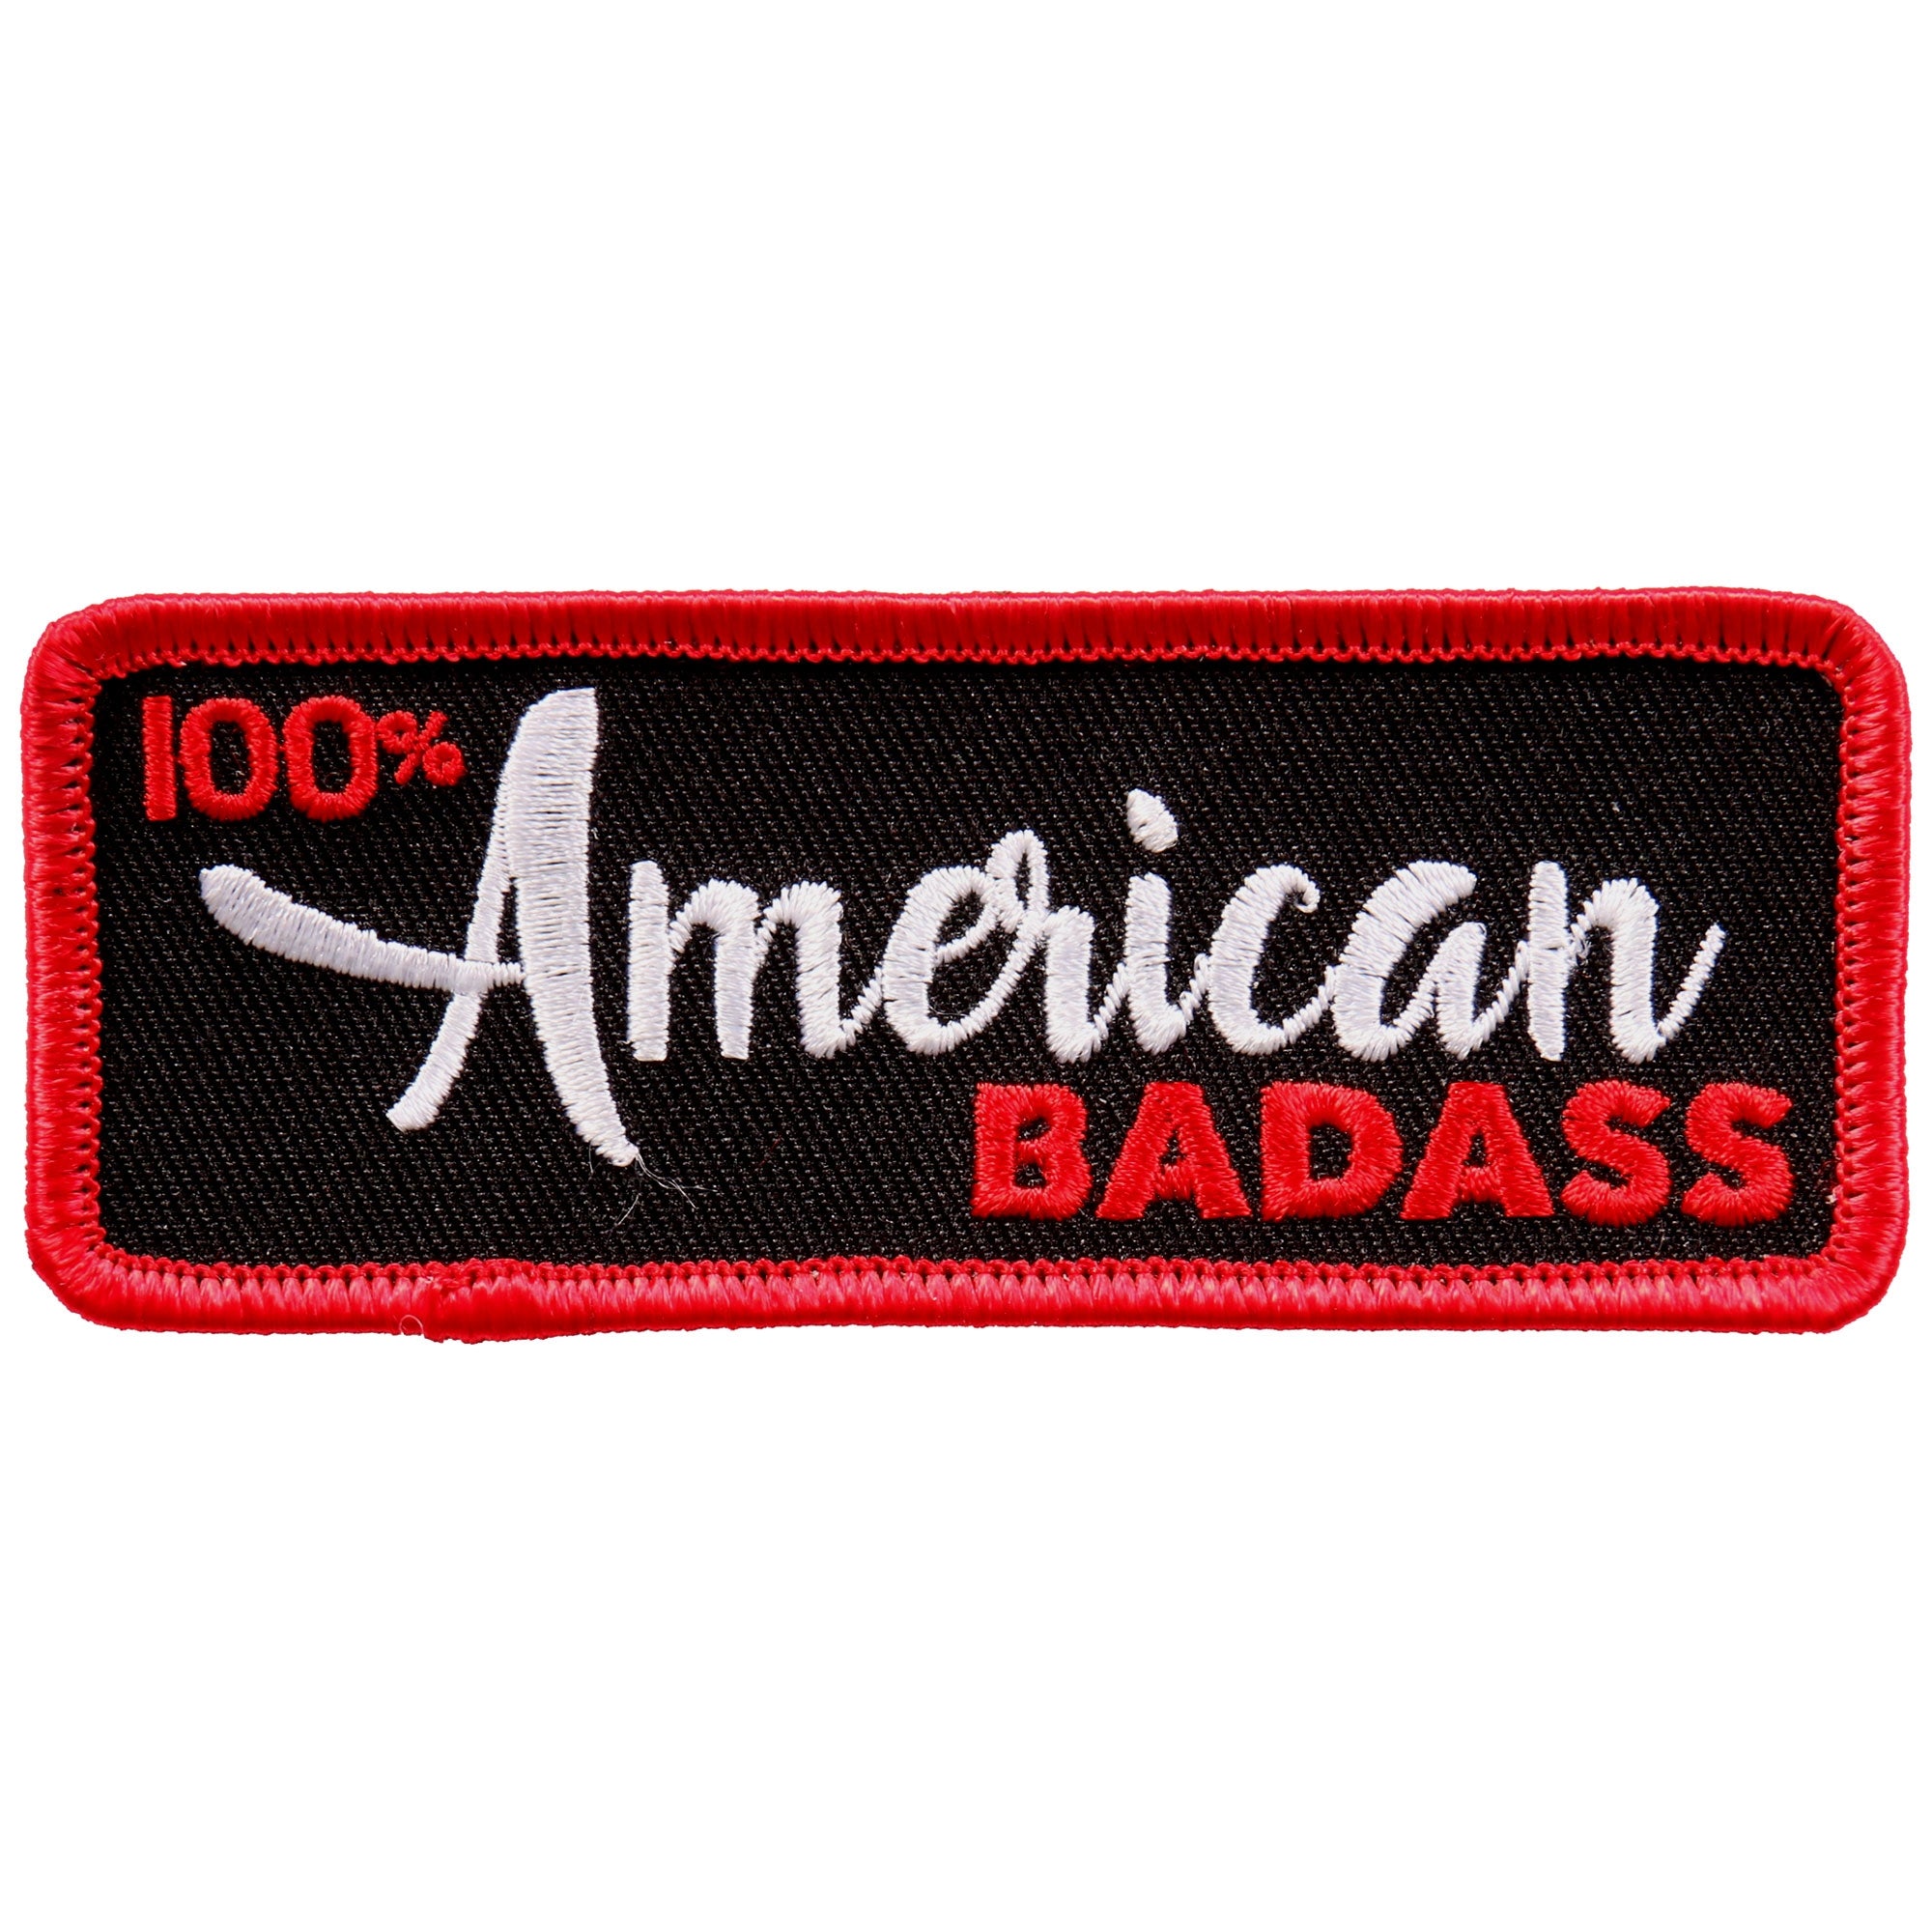 Hot Leathers 100 American Badass 4x2 Patch 8297